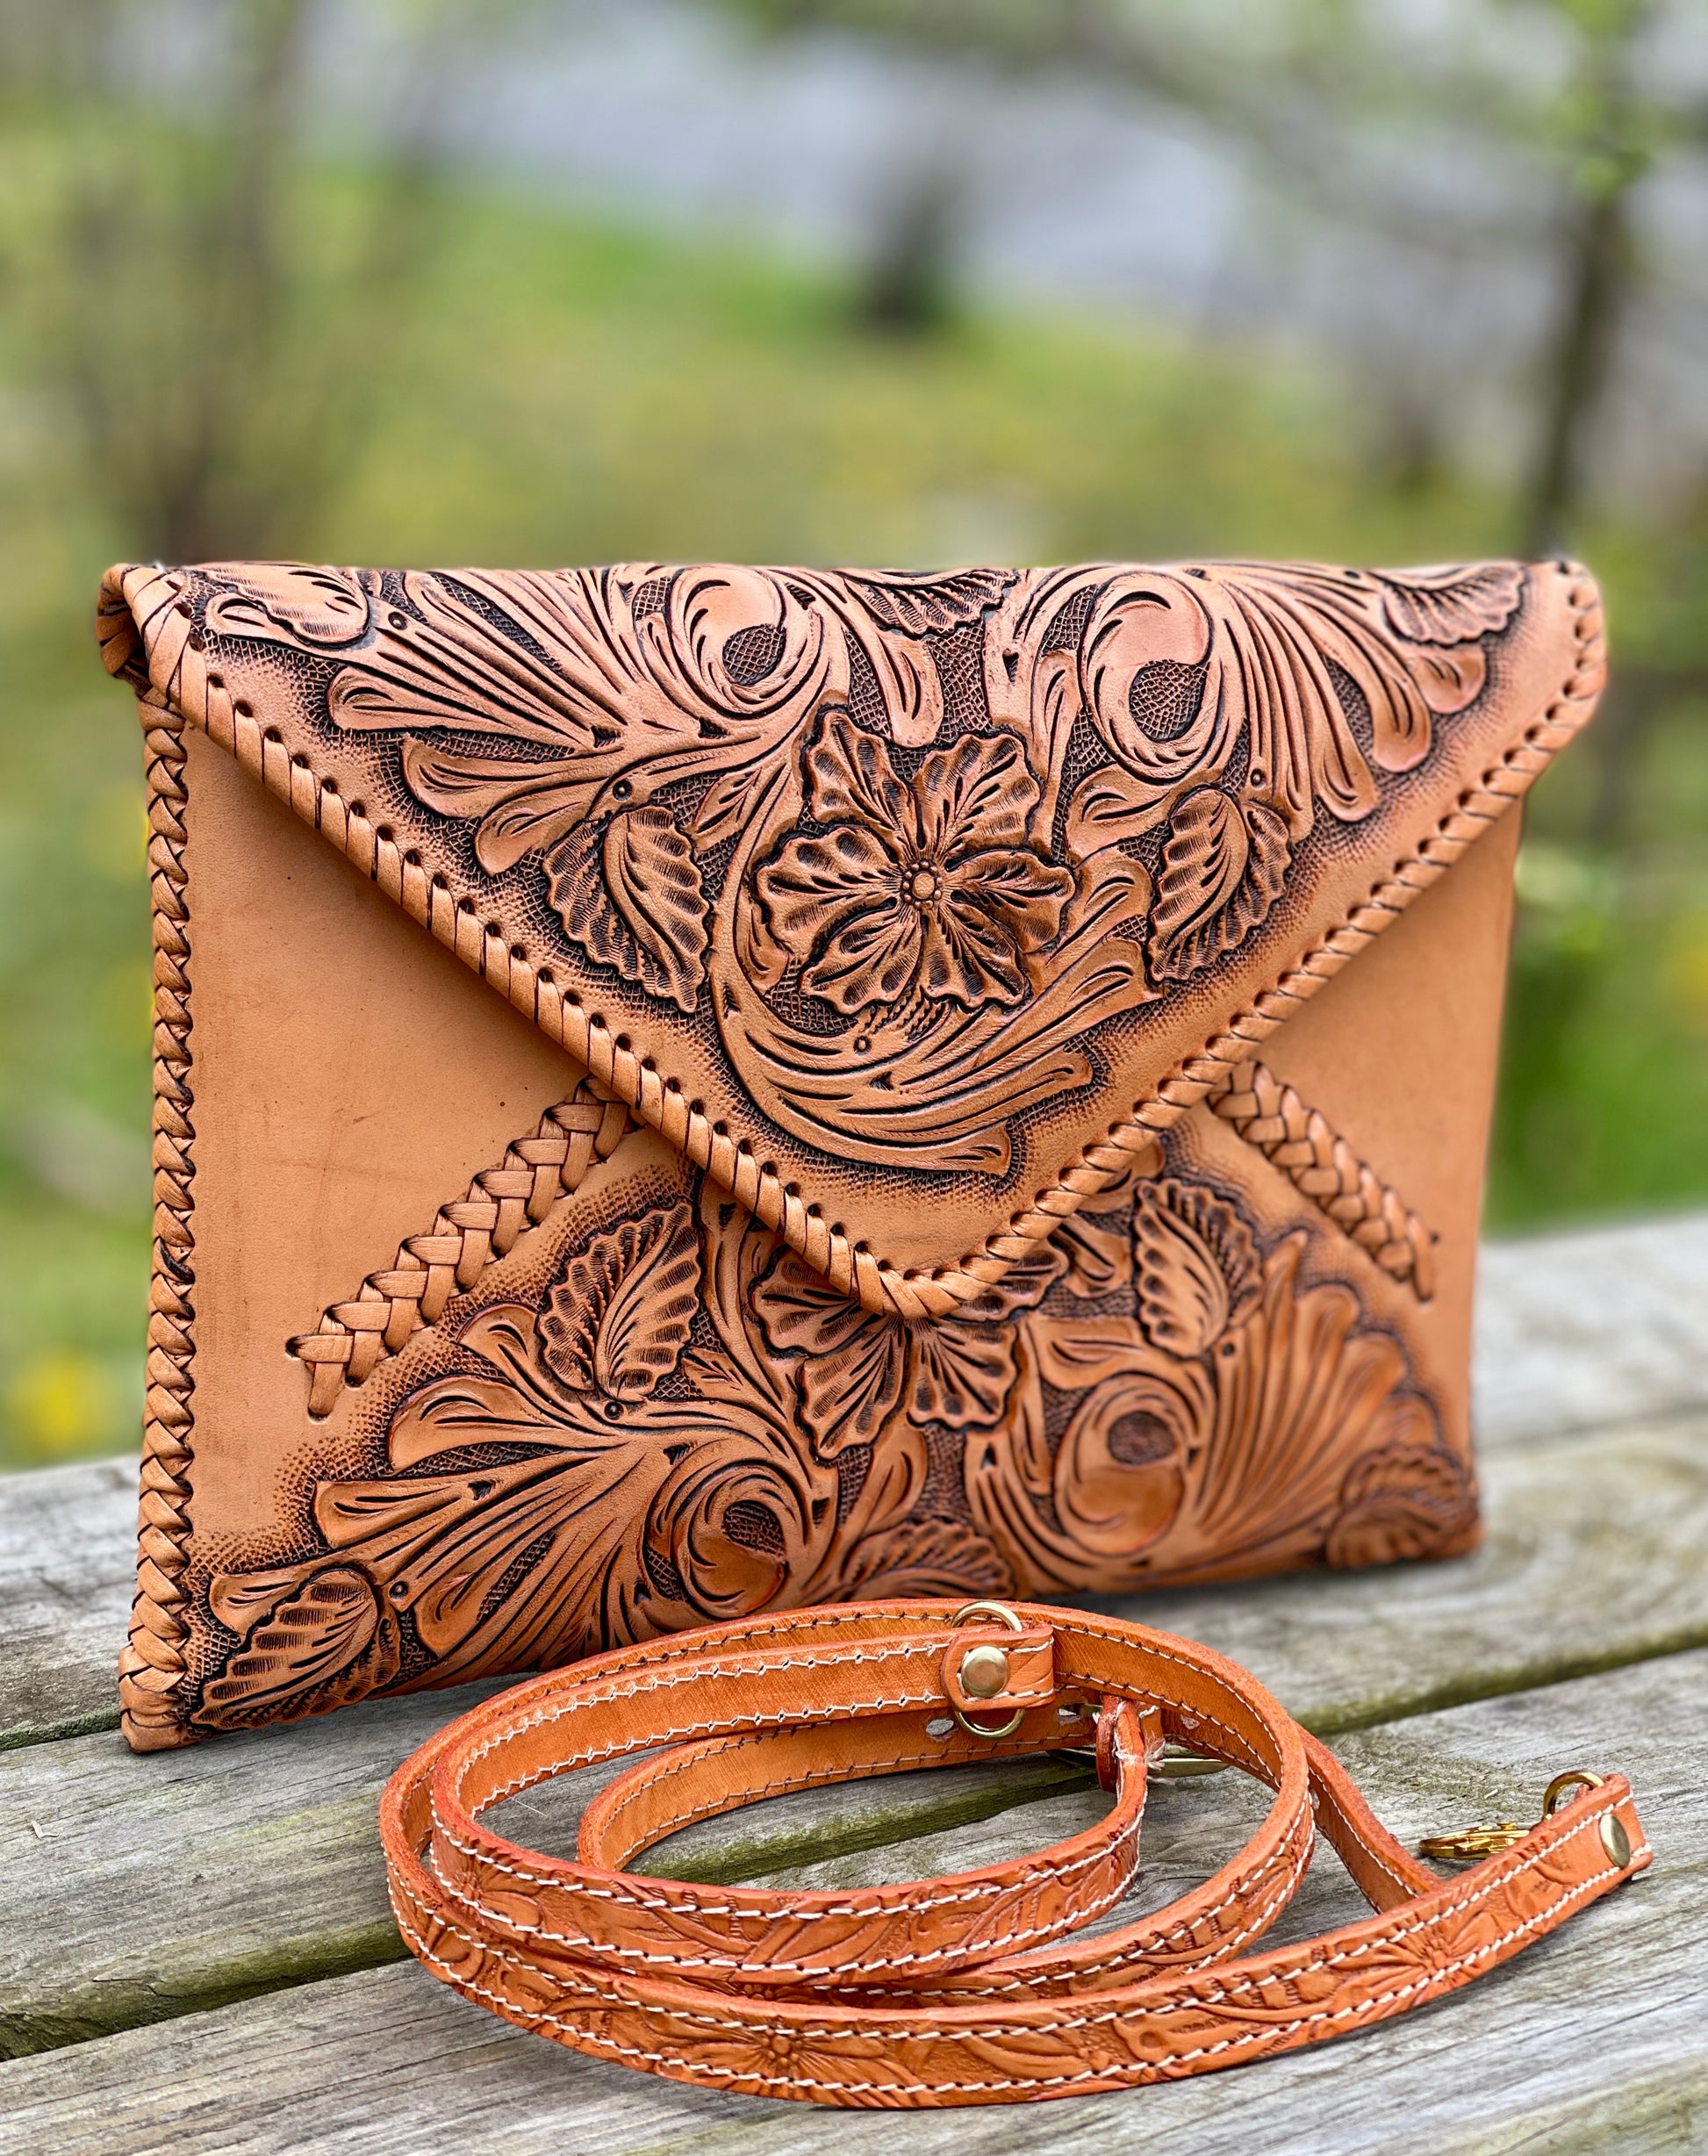 Hand-Tooled Leather Crossbody & Clutch Bag "ITALIA" by ALLE - ALLE Handbags